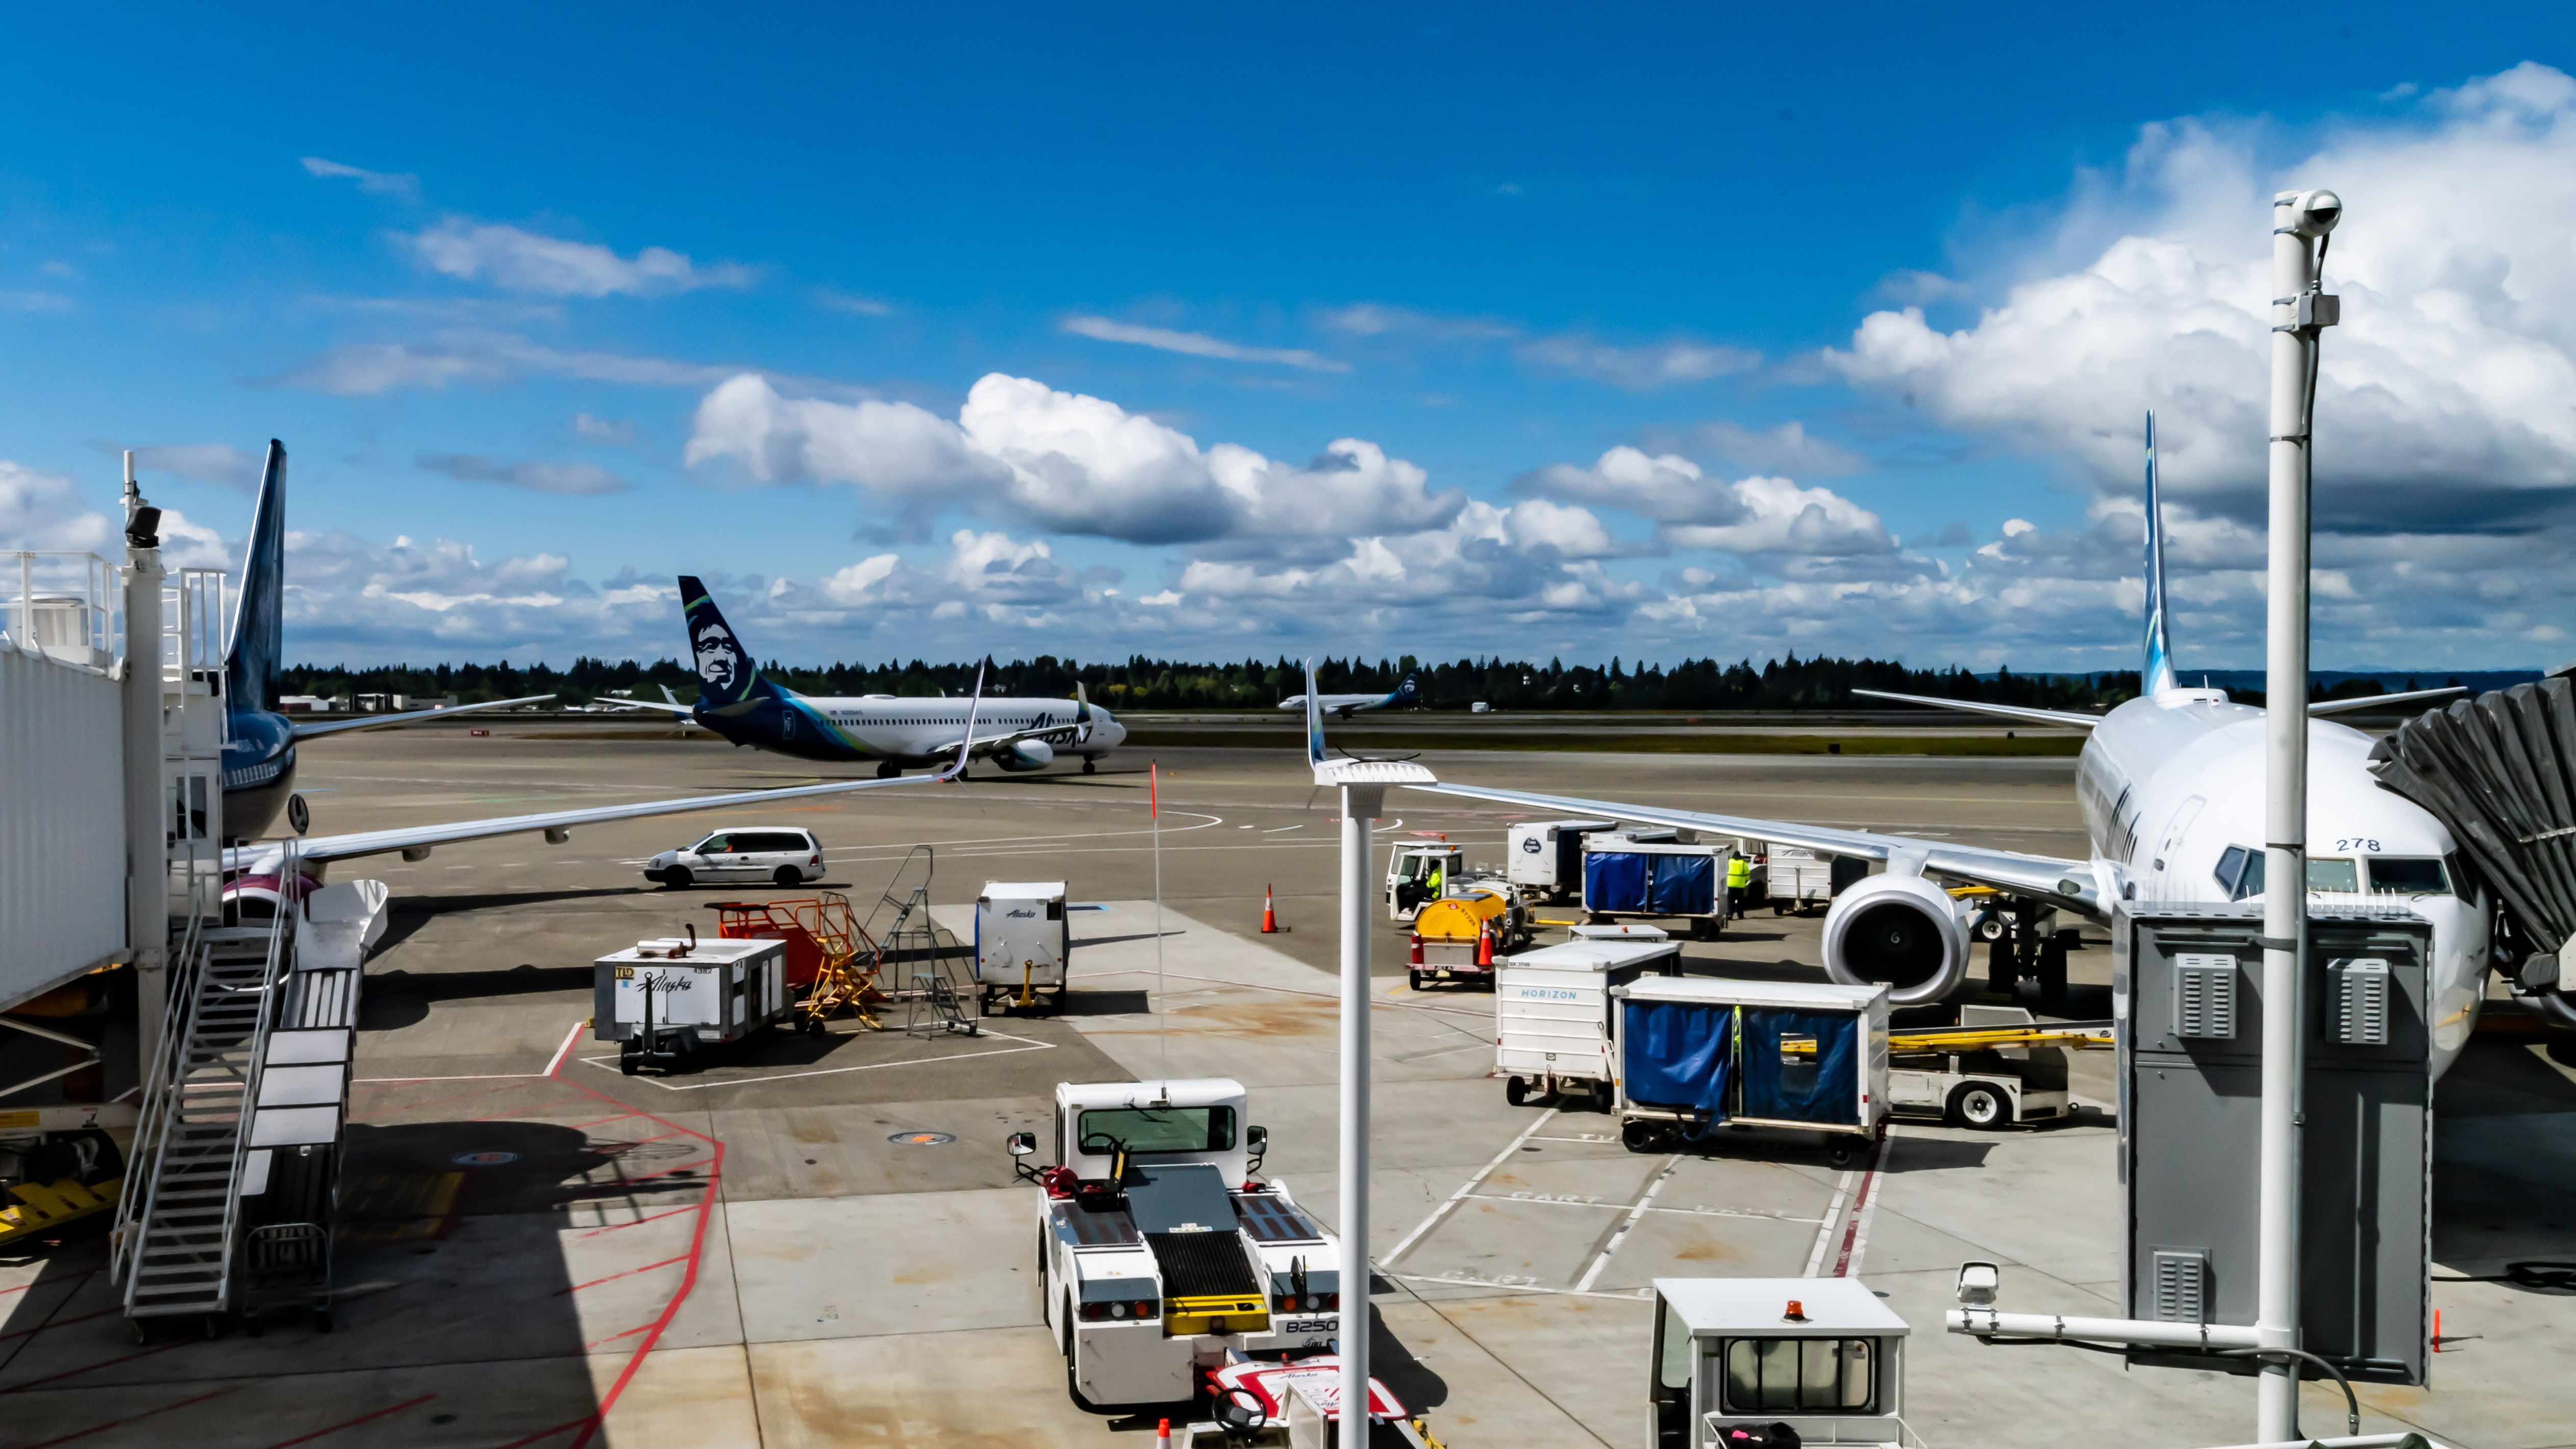 Alaska Airlines Jets Making KSEA Busy - Seattle-Tacoma International Airport flight ops as seen from one of the gates